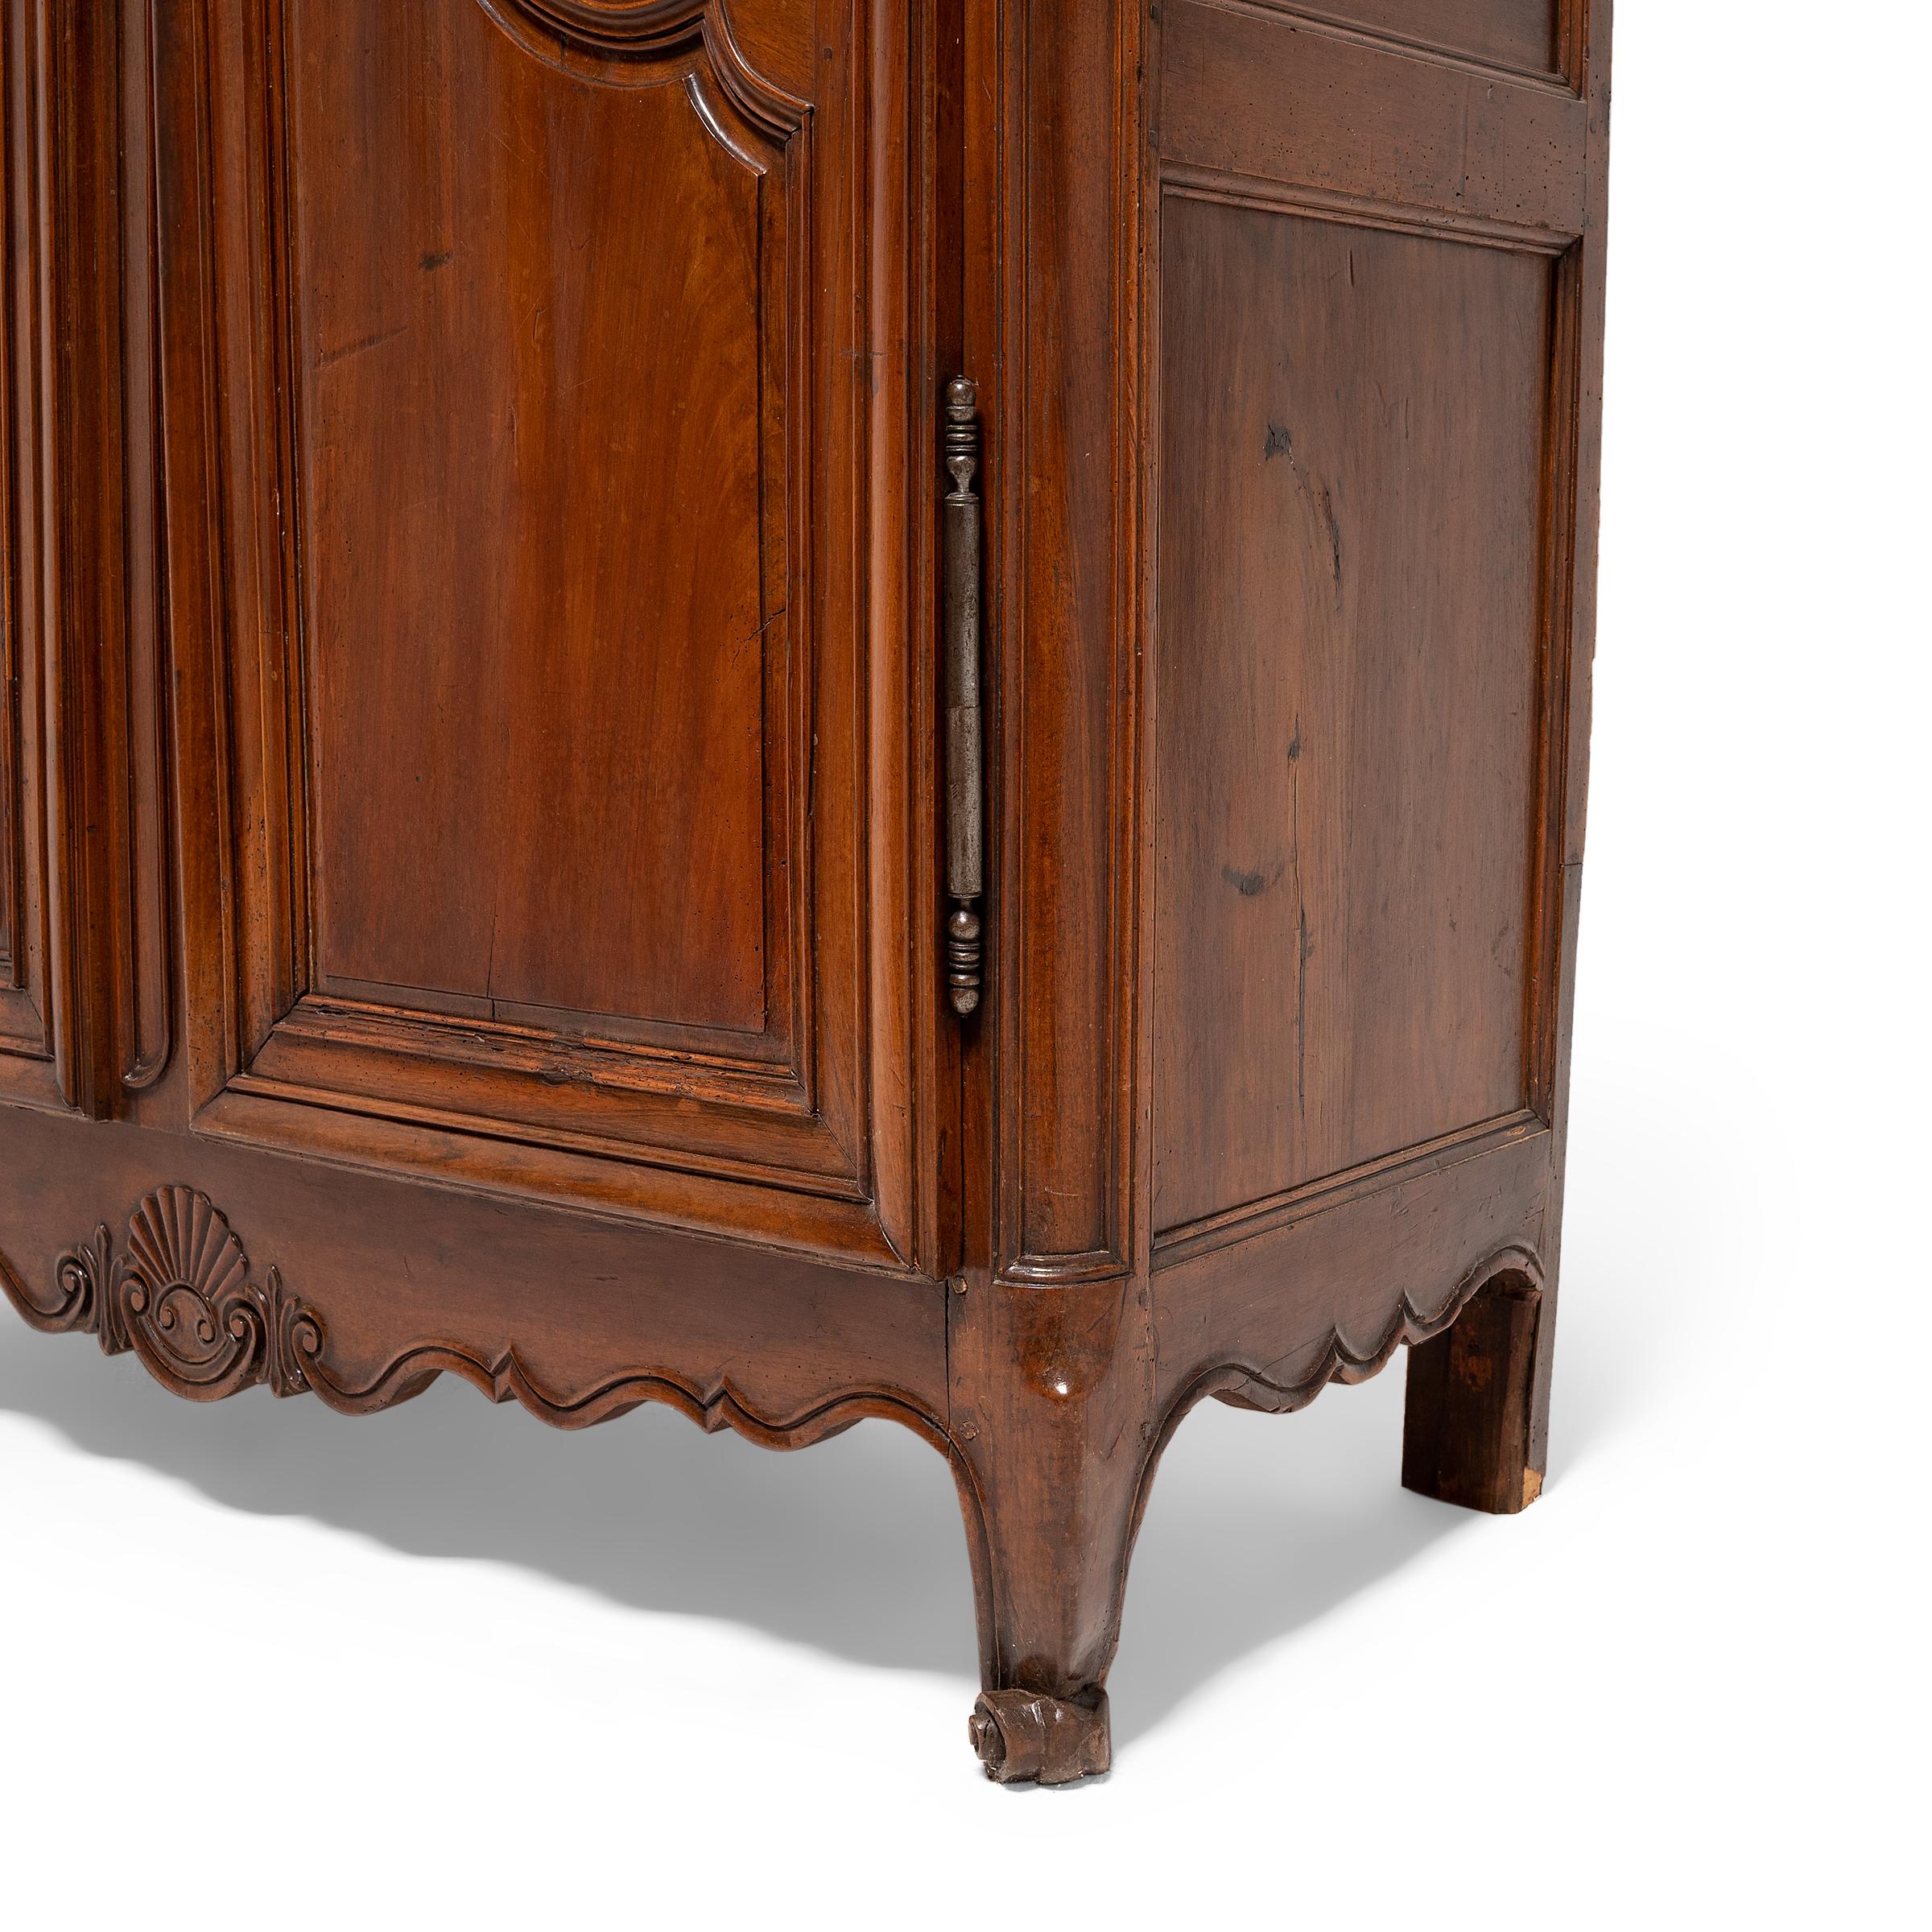 French Provincial Armoire with Arched Top, circa 1750 For Sale 1